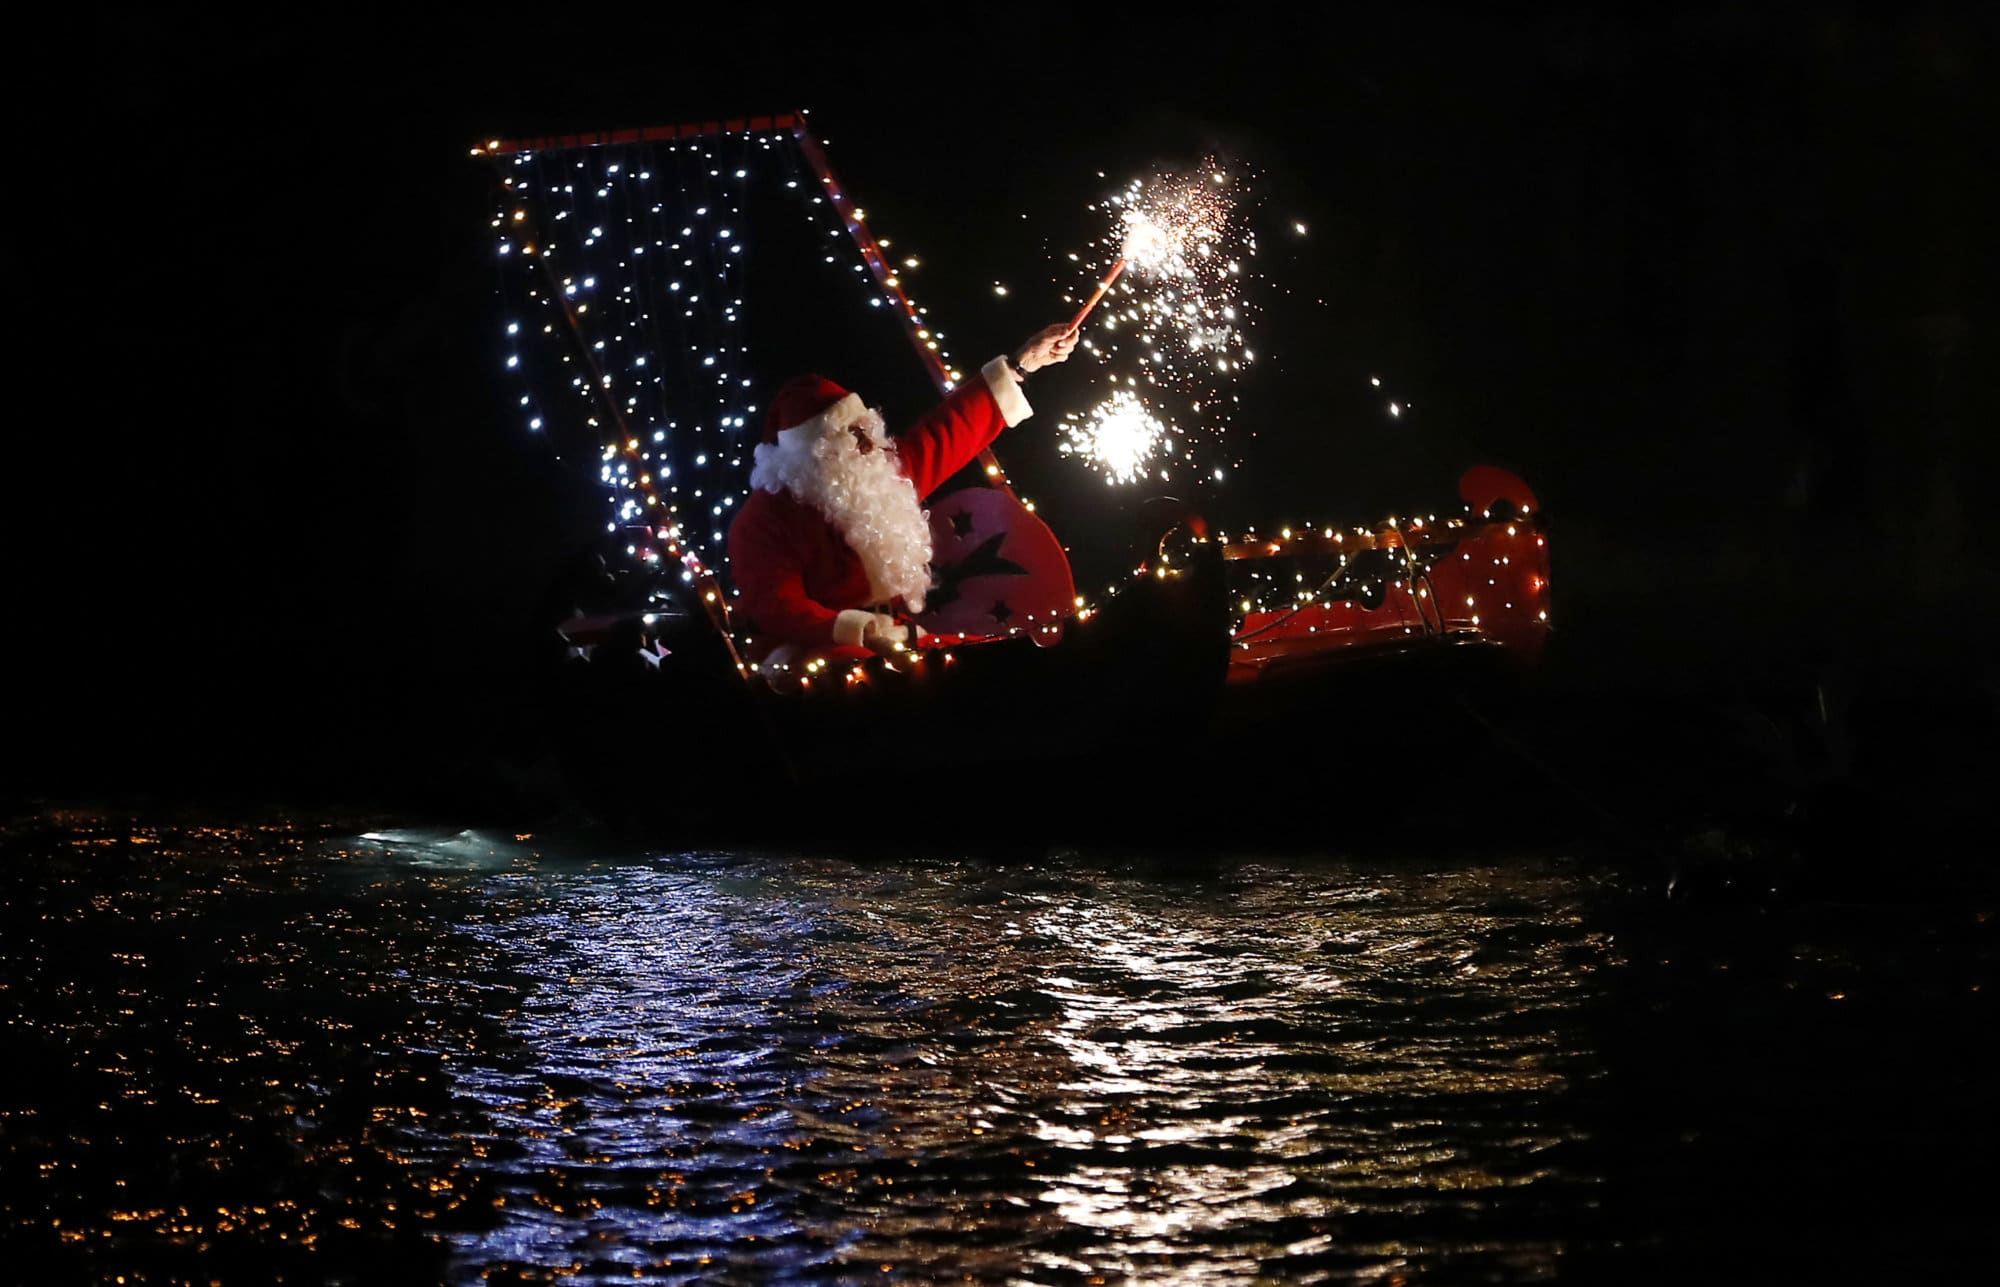 A man dressed as Santa Claus holds a flare as he sits on a boat during a Christmas eve celebrations in Imperia, Italy, Monday, Dec. 24, 2018. (AP Photo/Antonio Calanni)